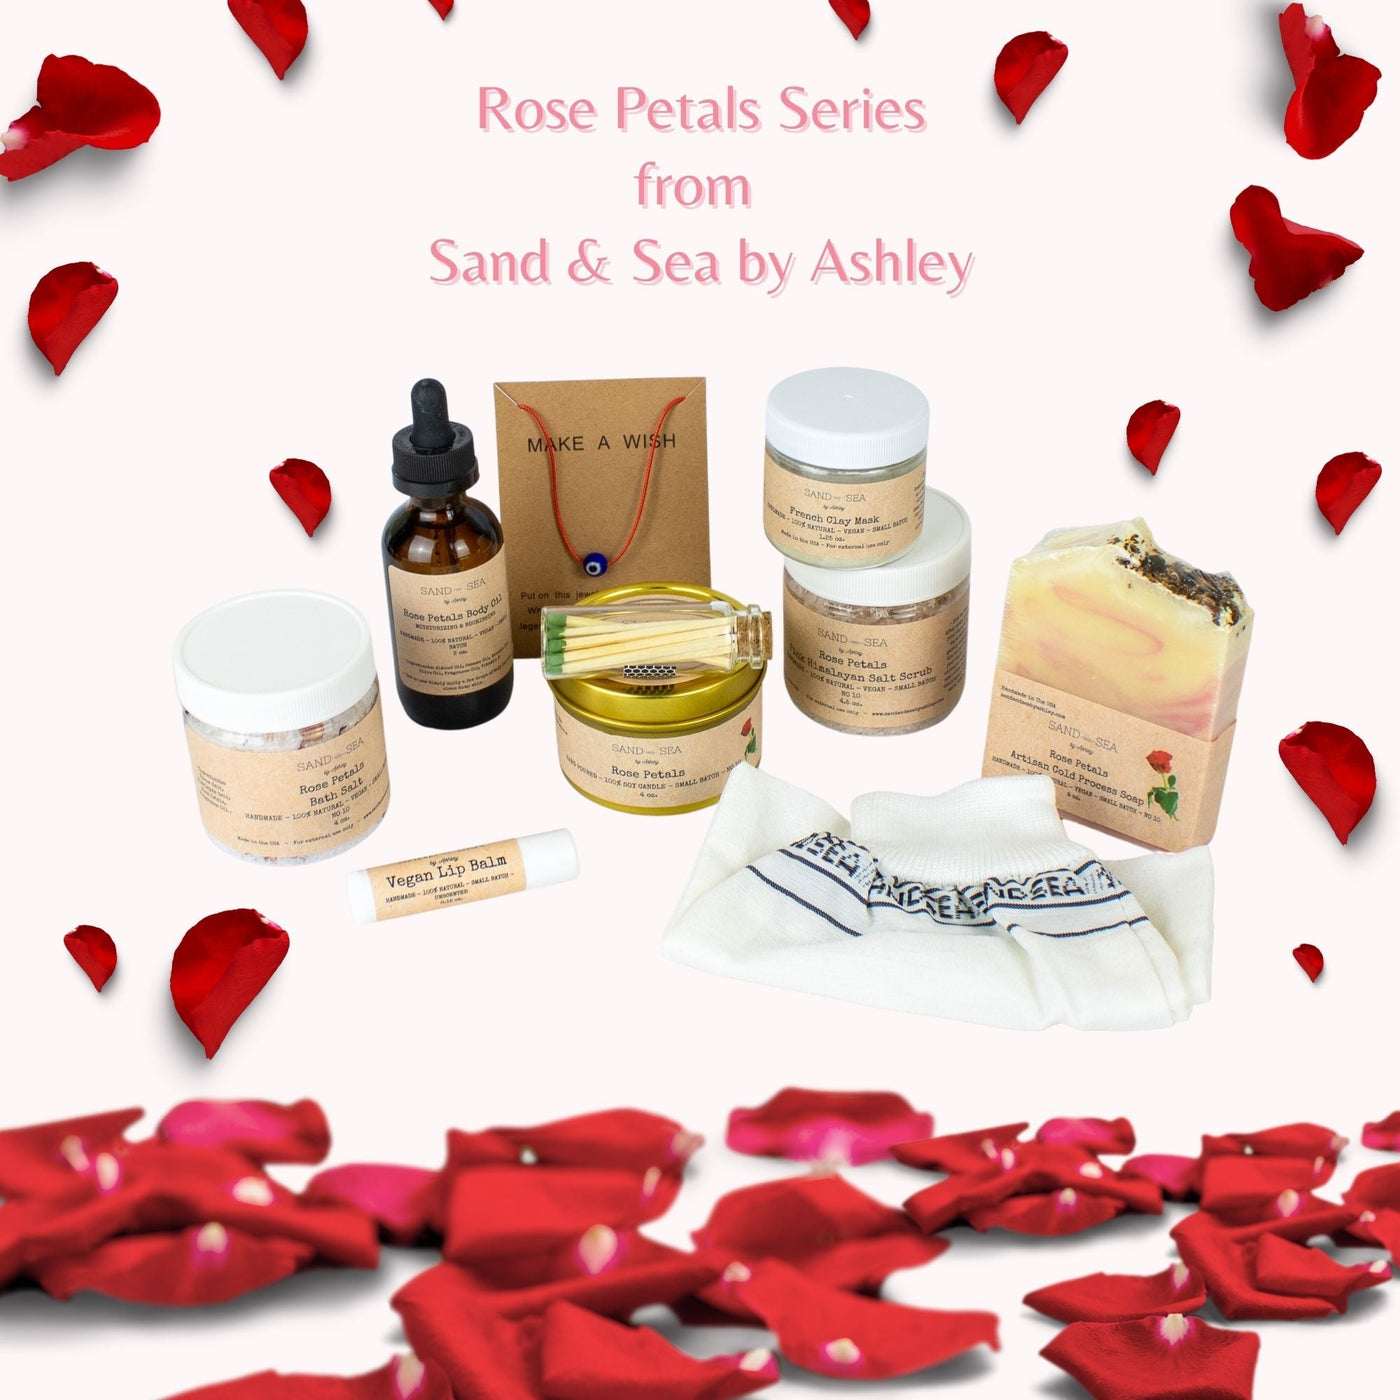 Gift Basket for Christmas - Handmade Artisan Rose Petals Spa Gift Set for Woman 10 pieces - Sand & Sea by Ashley